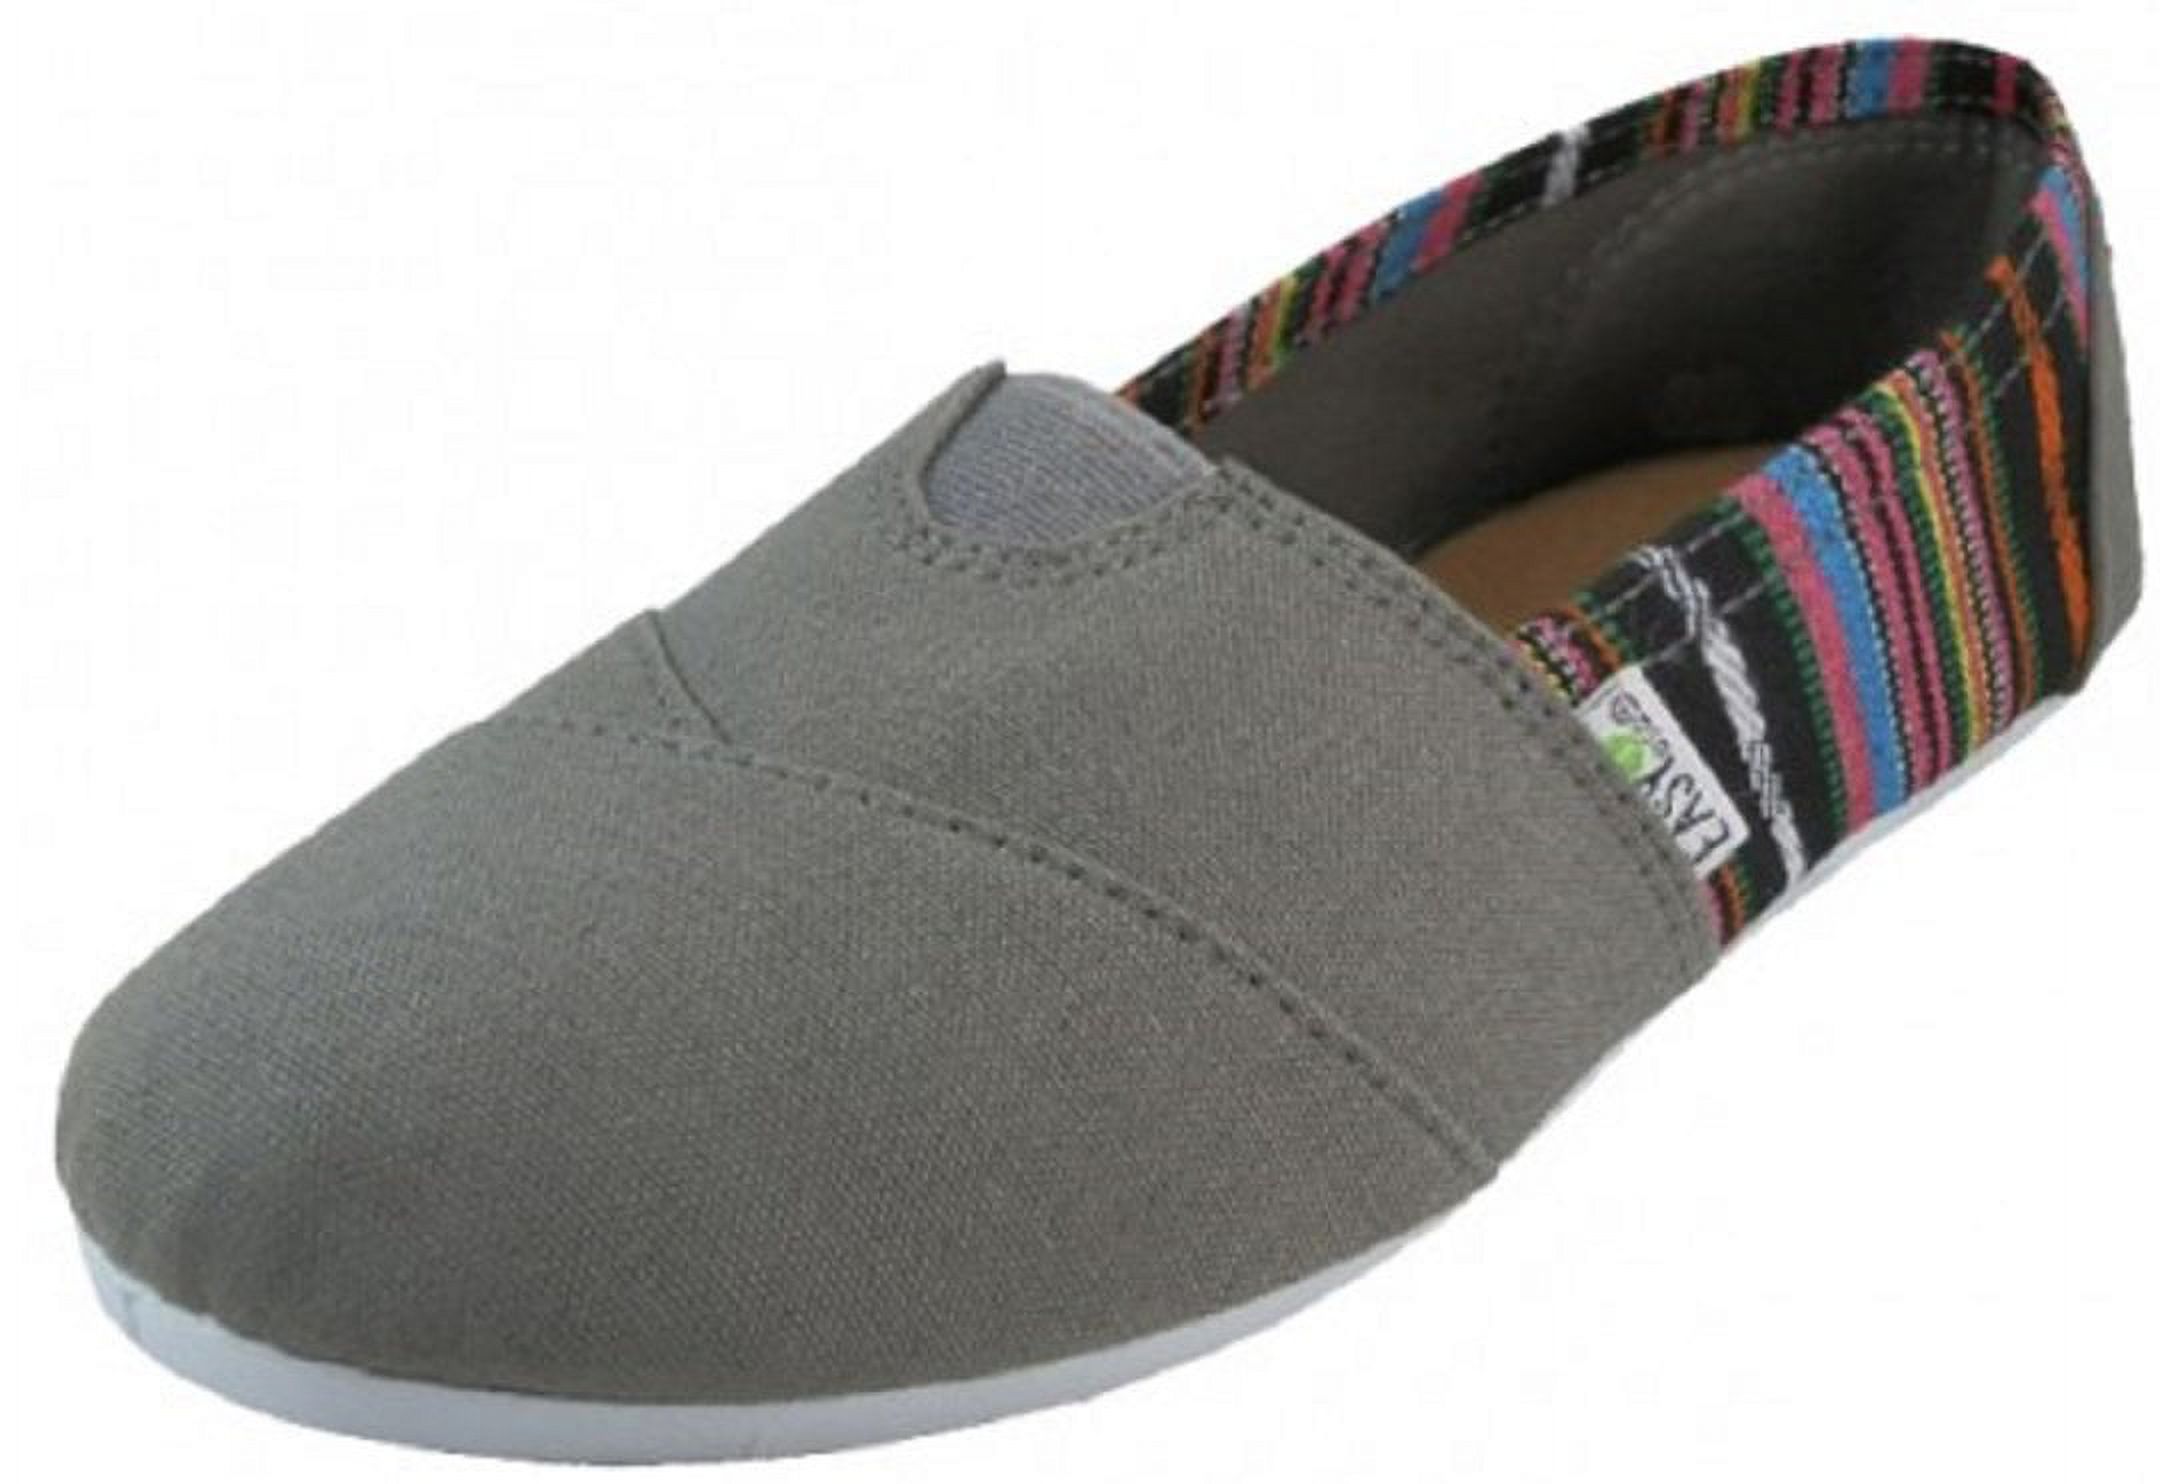 EasySteps Women's Canvas Slip-On Shoes with Padded Insole - image 1 of 2